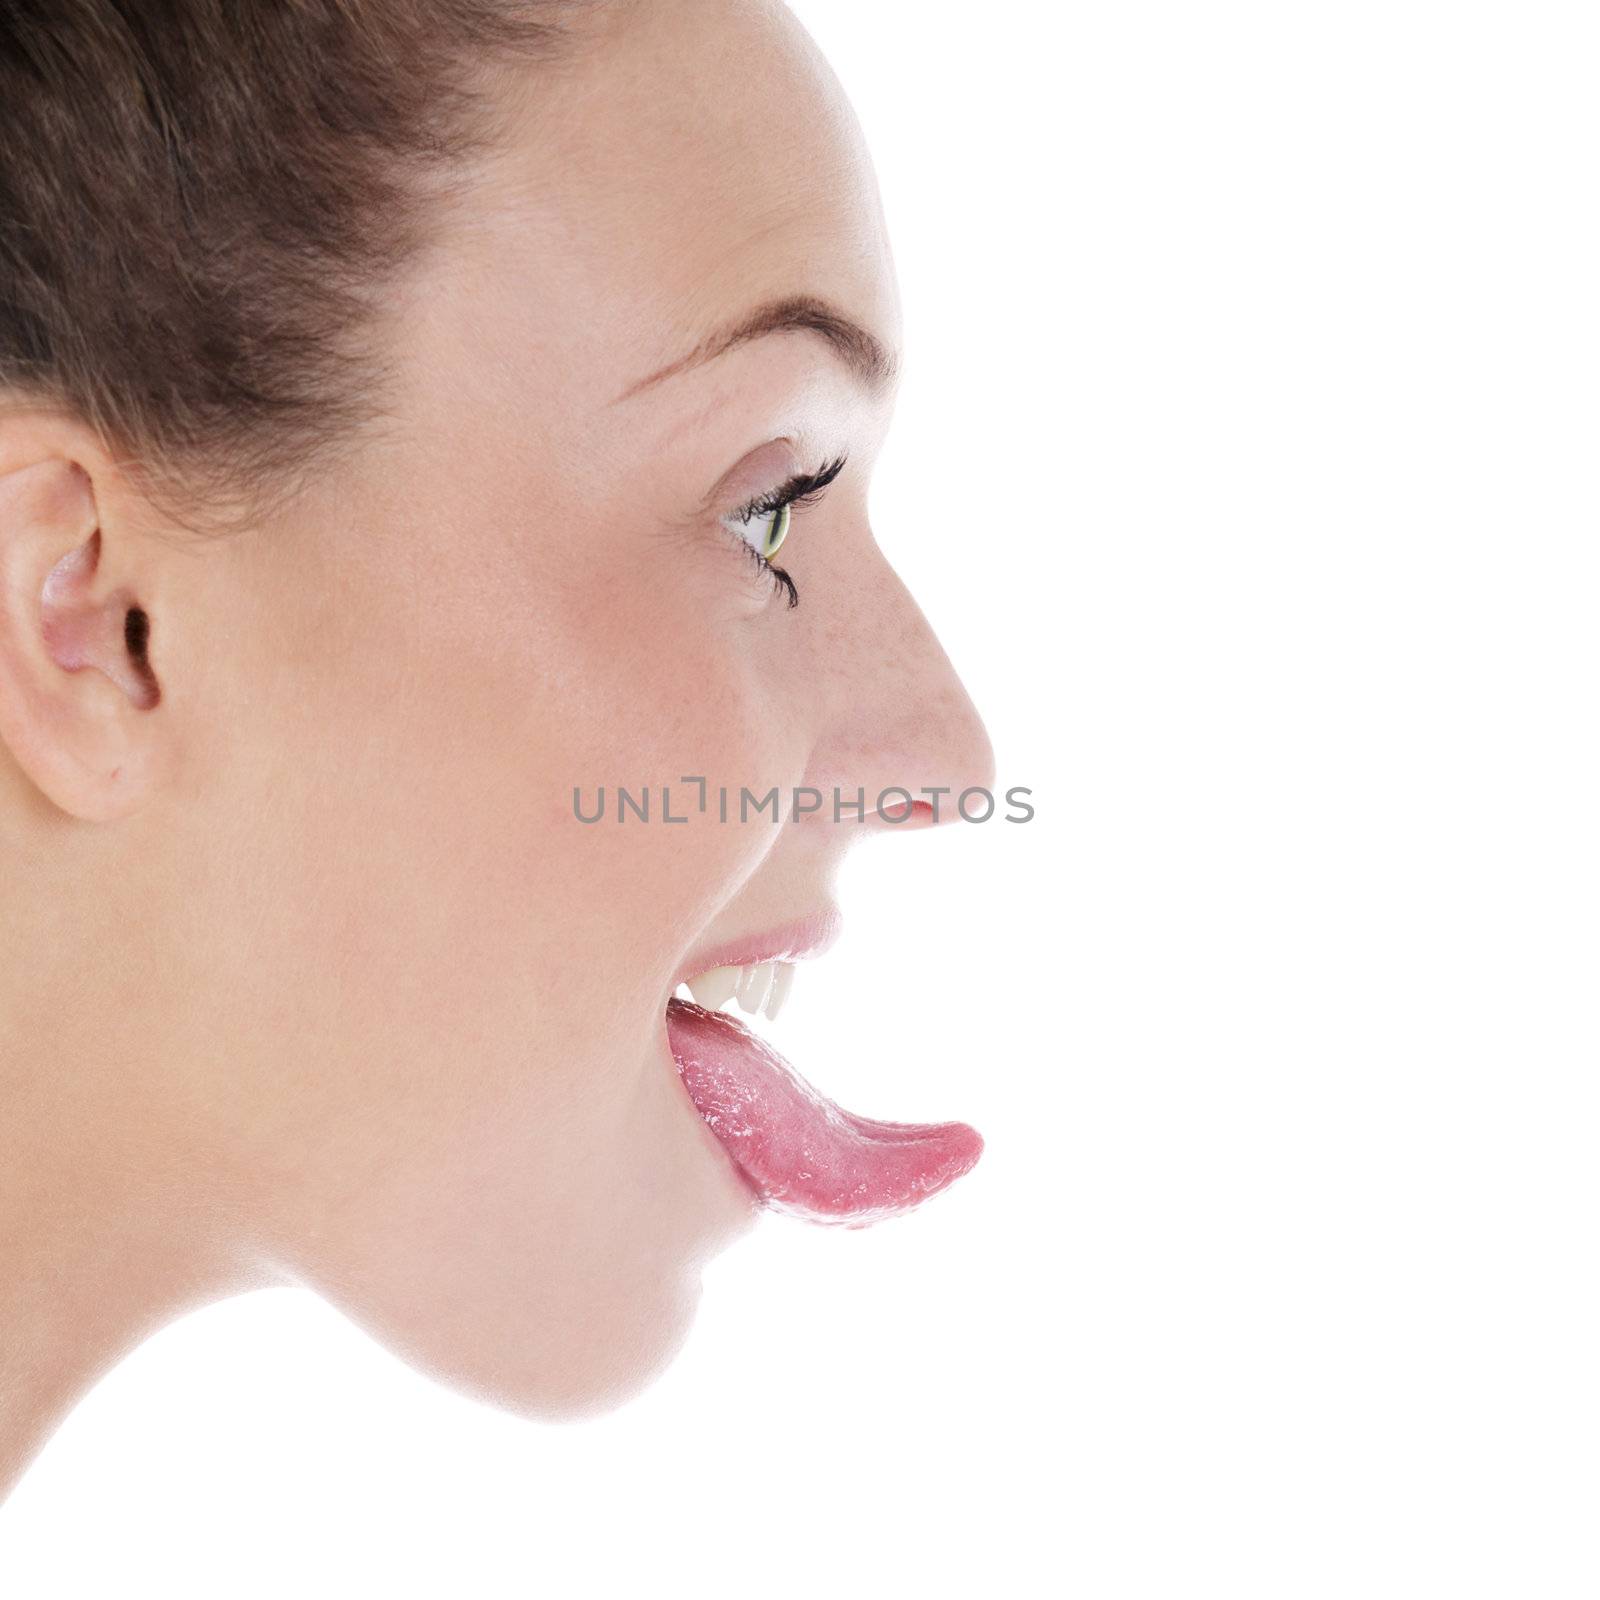 Young woman with opened mouth and long curved tongue. Isolated over white background